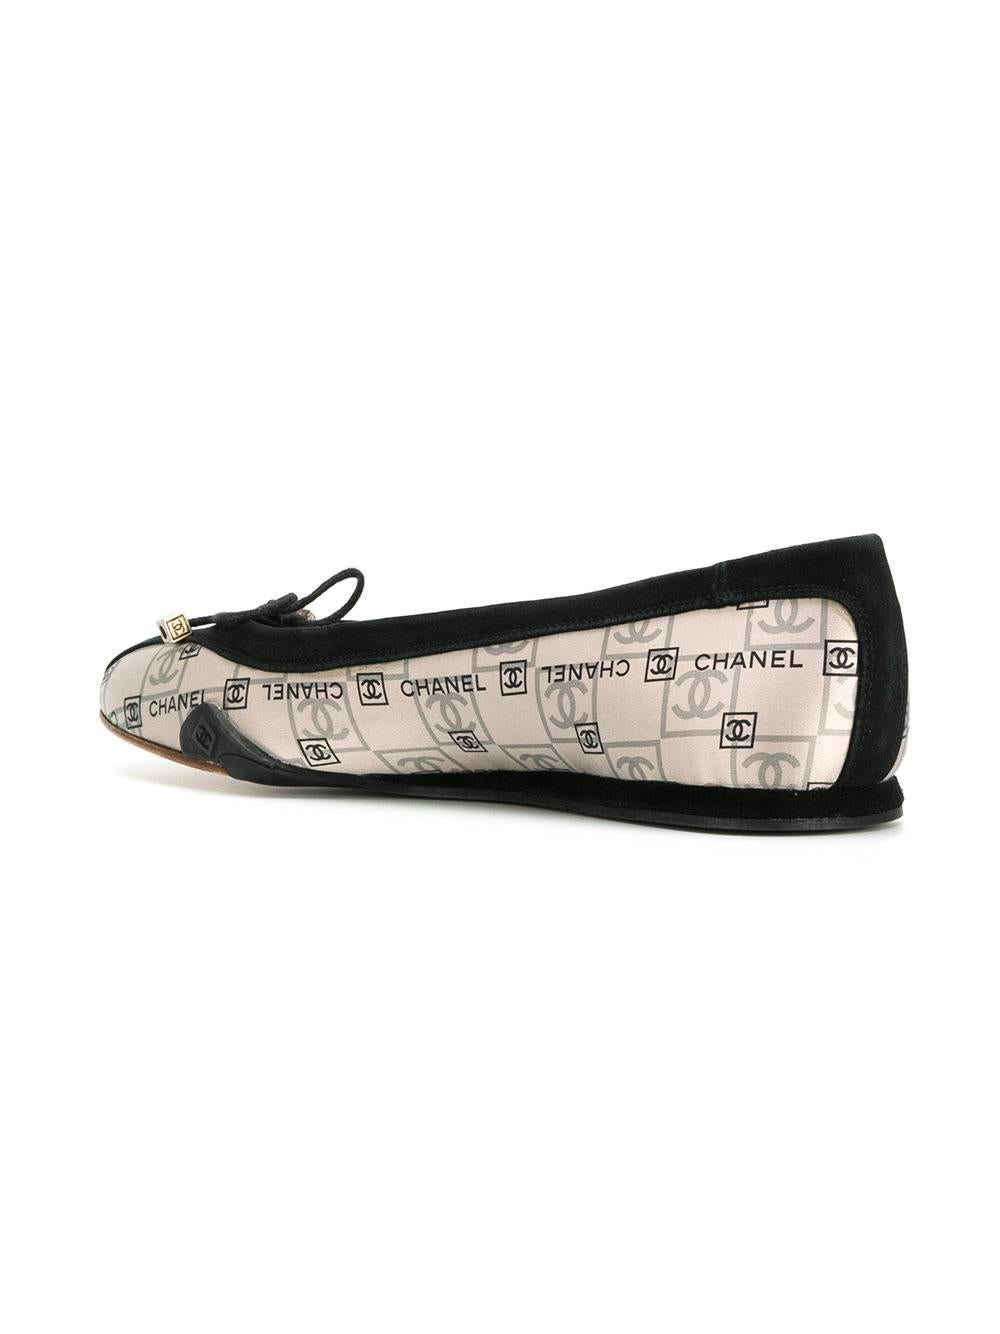 These ballerinas were crafted from beige and grey silk satin and black suede, displaying a comfortable branded leather insole. The pair features a logo allover pattern and round toes, embellished by a front bow, which is finished with interlocking